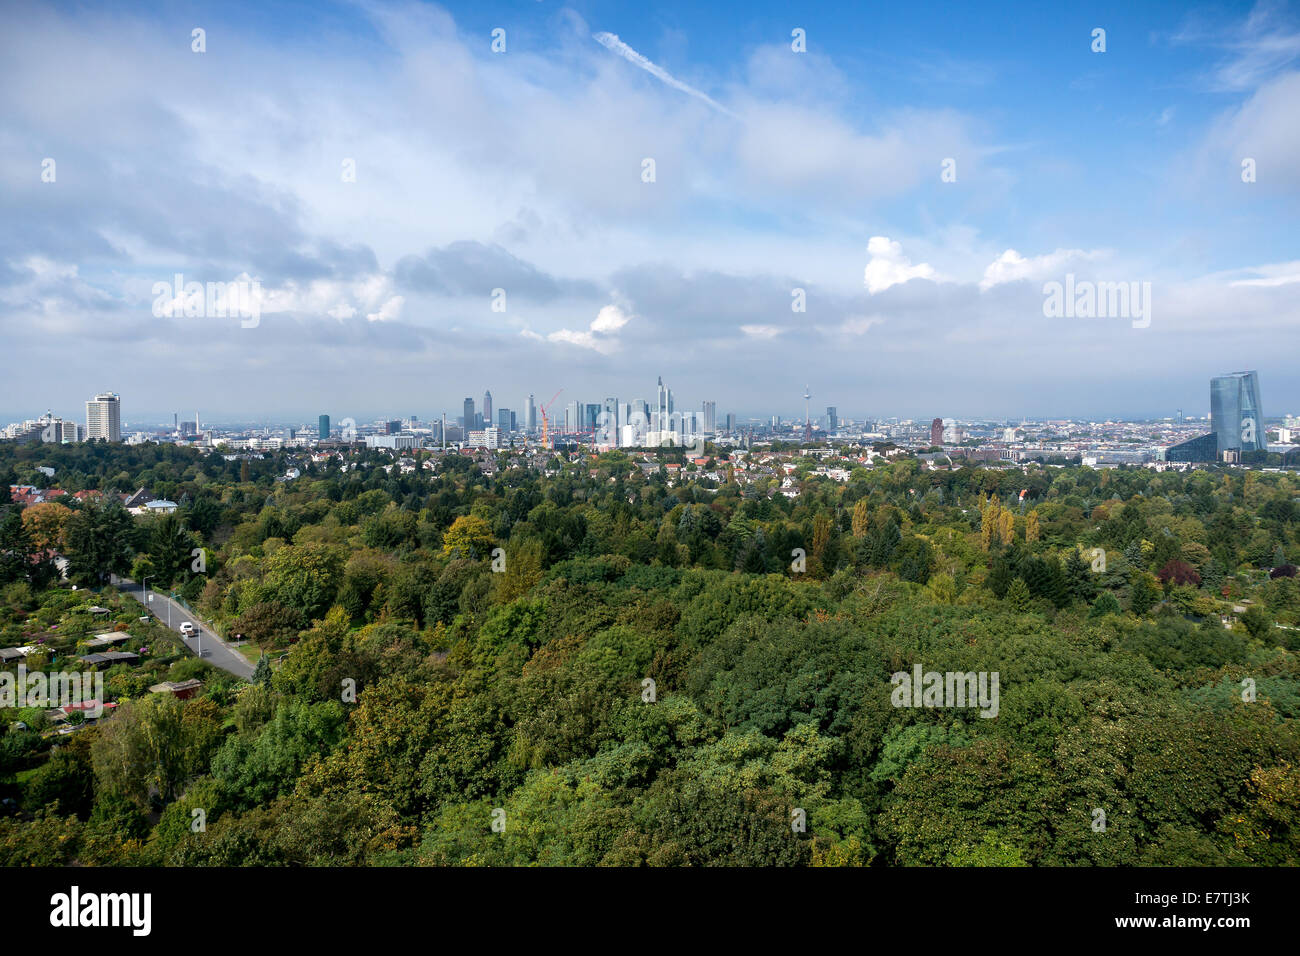 Germany: Skyline of Frankfurt as seen from Goethe Tower. Photo from 20. September 2014. Stock Photo